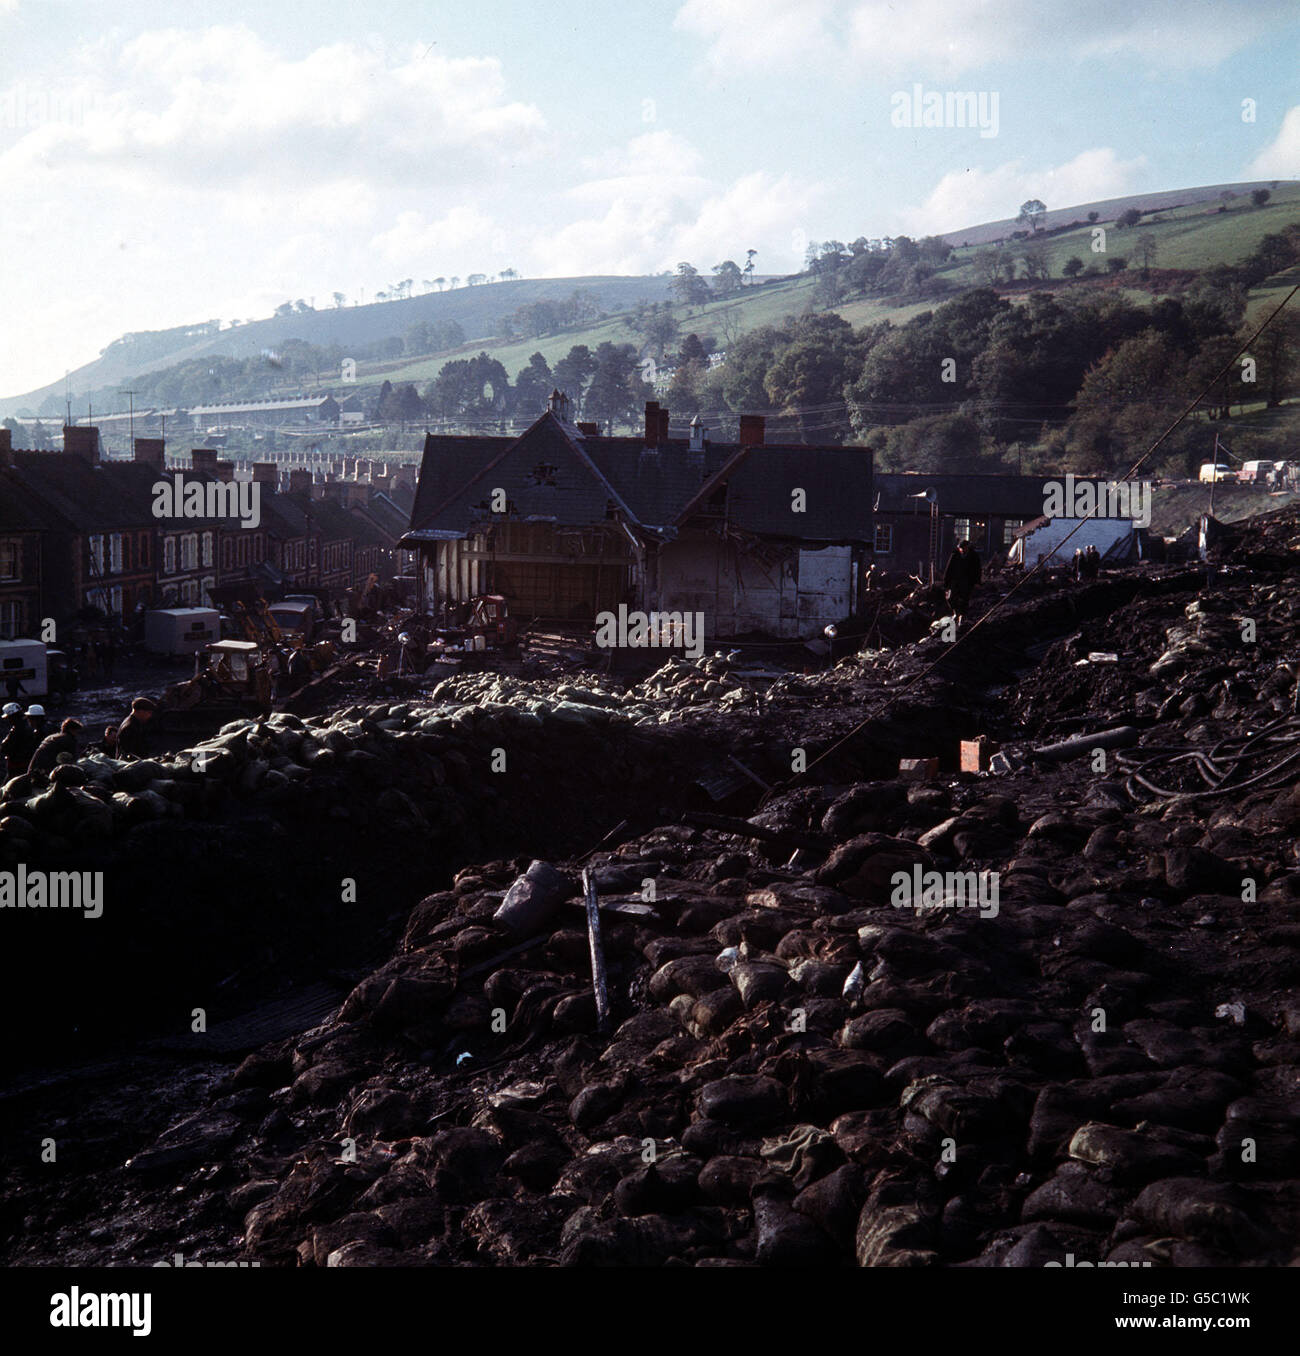 ABERFAN 1966: The mountain that moved. The mass of coal sludge after it moved down and buried 116 children and 28 adults at the Pantglas Junior School (background) at the mining village of Aberfan in South Wales. Stock Photo